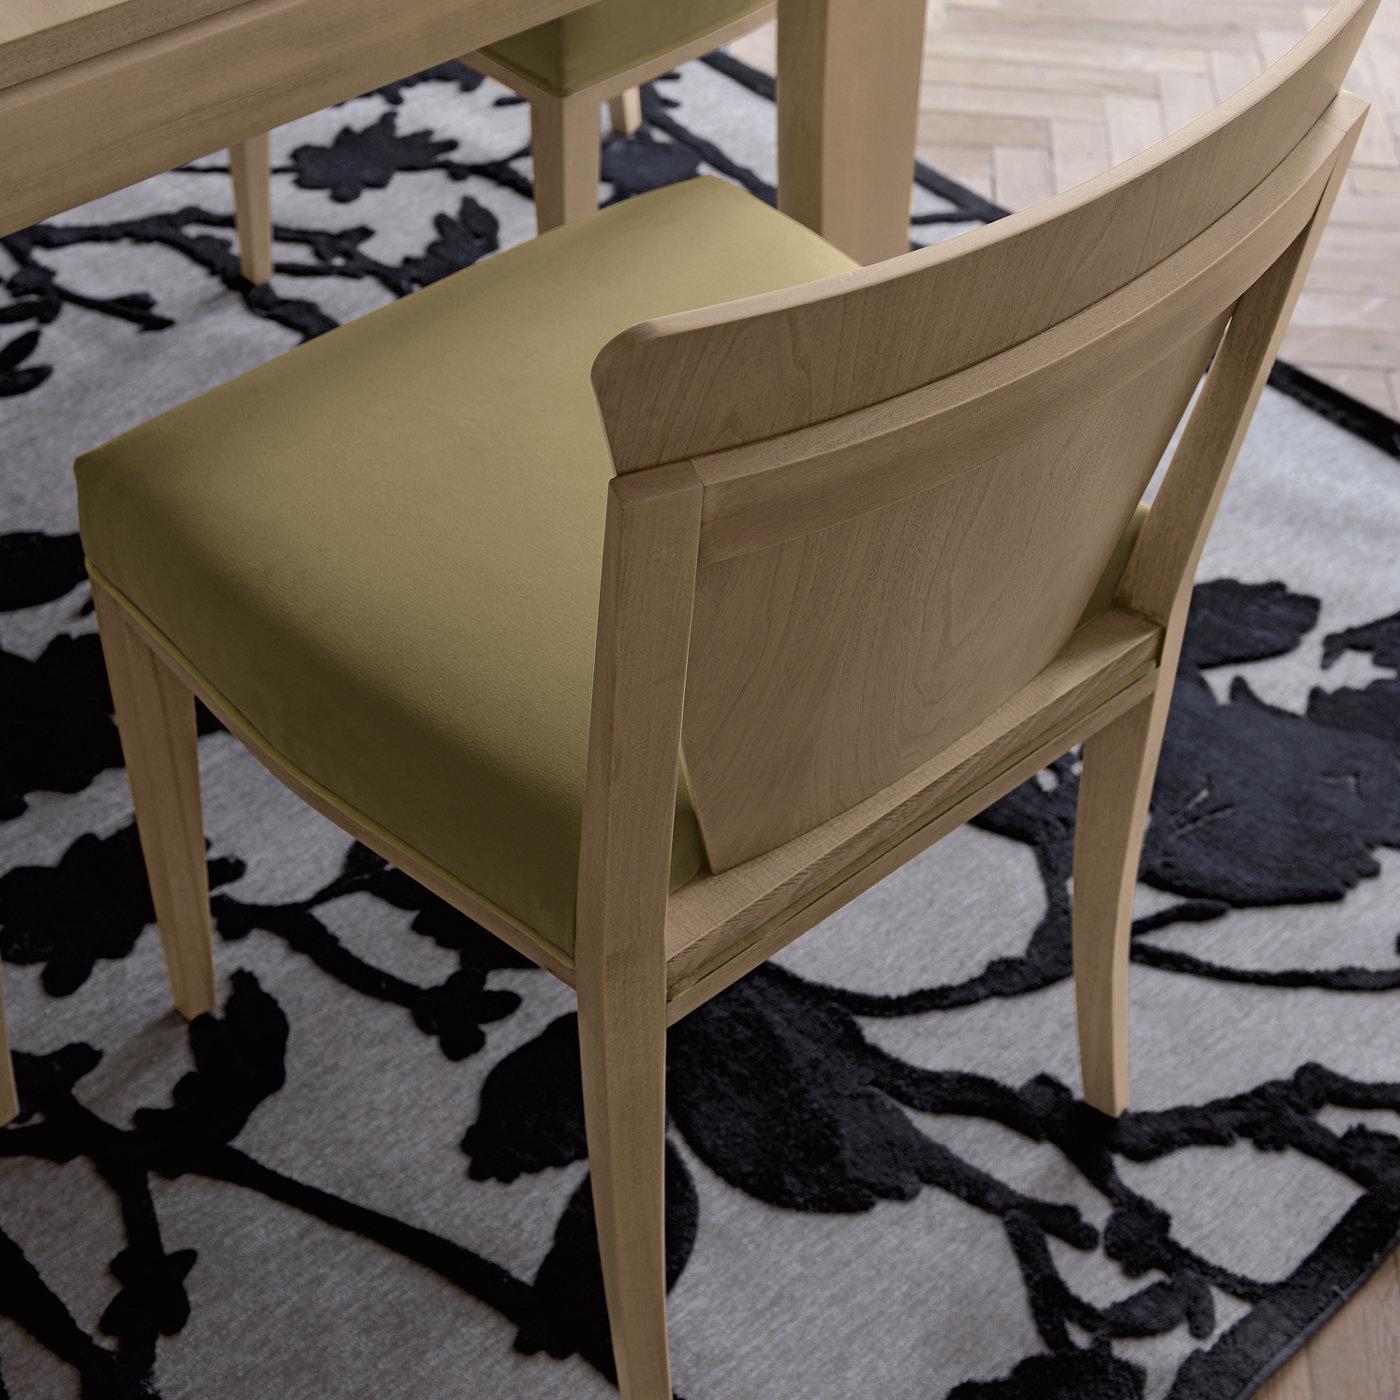 From a complete collection of complementary furnishings, the Decor Chair is an elegant touch to a kitchen or dining area. Crafted in beechwood with Modo10's Noce Natura finish (a natural walnut), the chair exudes cool, subdued elegance. The chair is